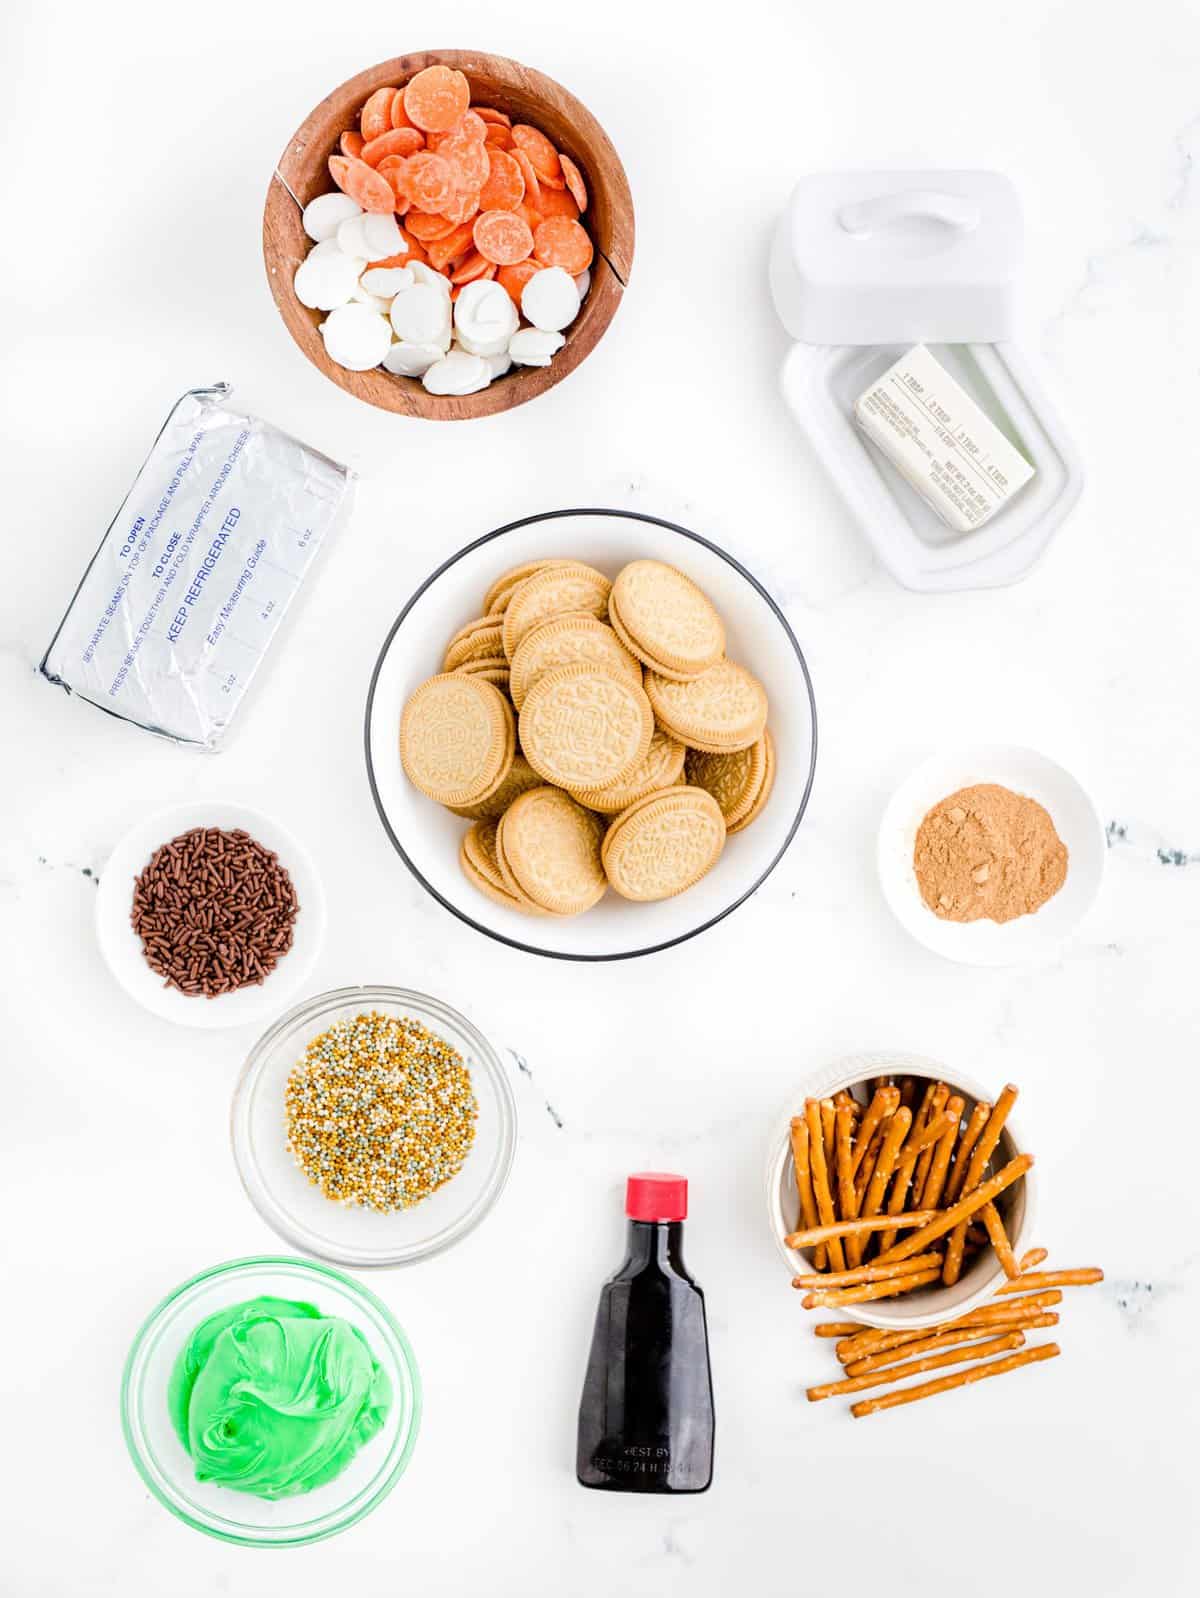 Ingredients needed: Golden Oreo Cookies, cream cheese, butter, vanilla extract, pumpkin spice, colored candy melts, green icing, pretzel sticks and Fall colored sprinkles.